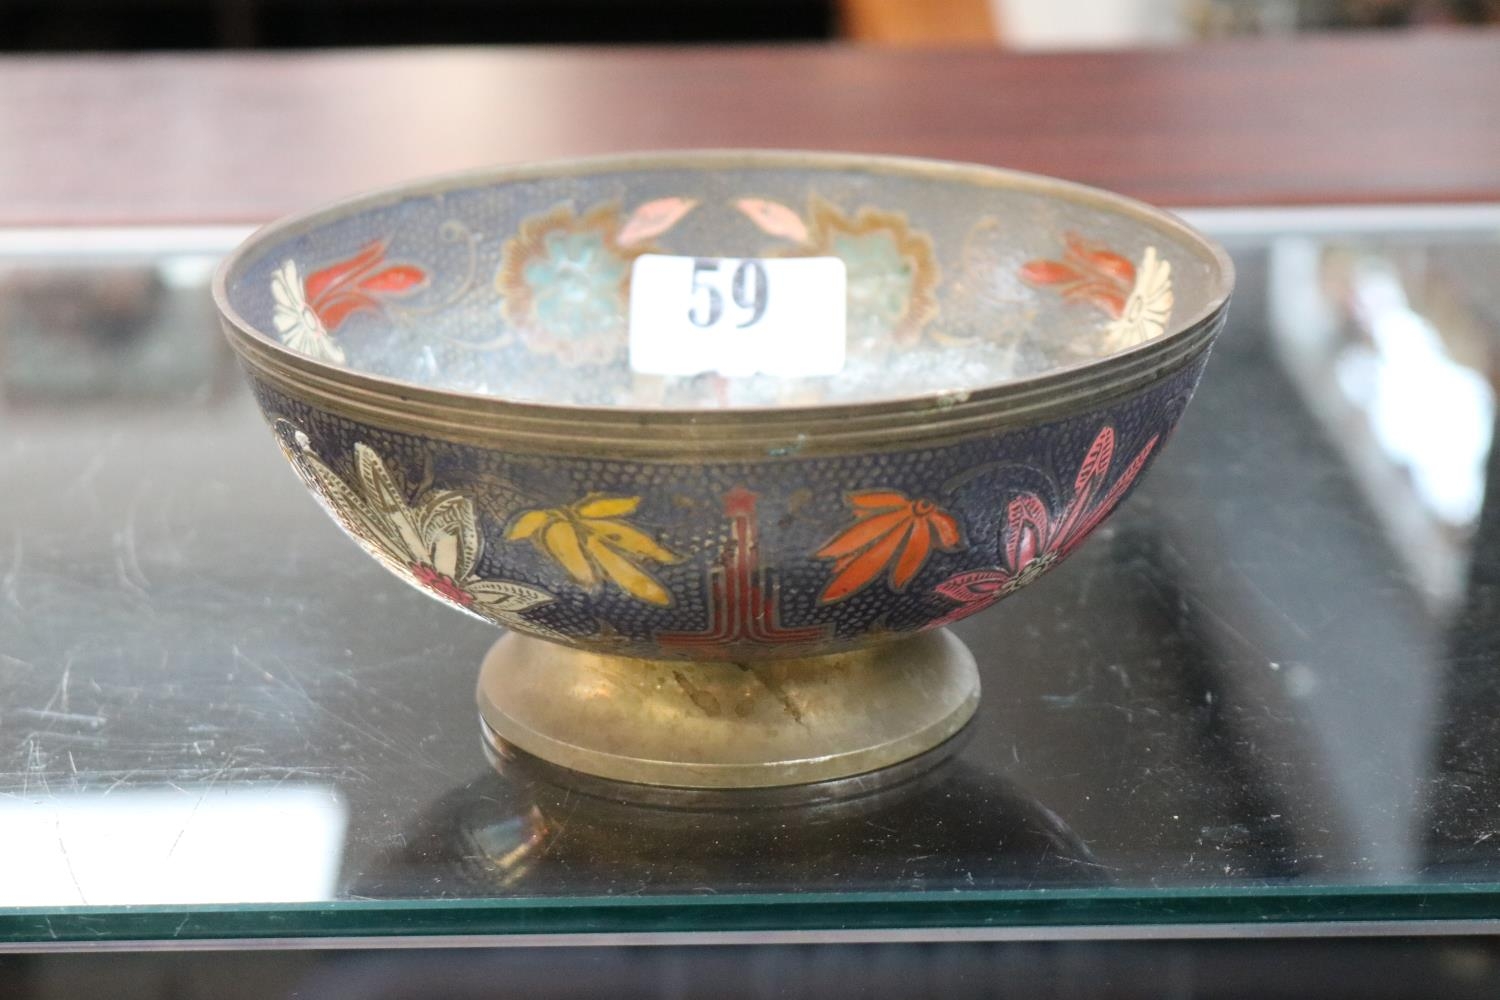 1980 Moscow Summer Olympics souvenir bowl, brass and hand painted, of far eastern influence. - Image 2 of 2